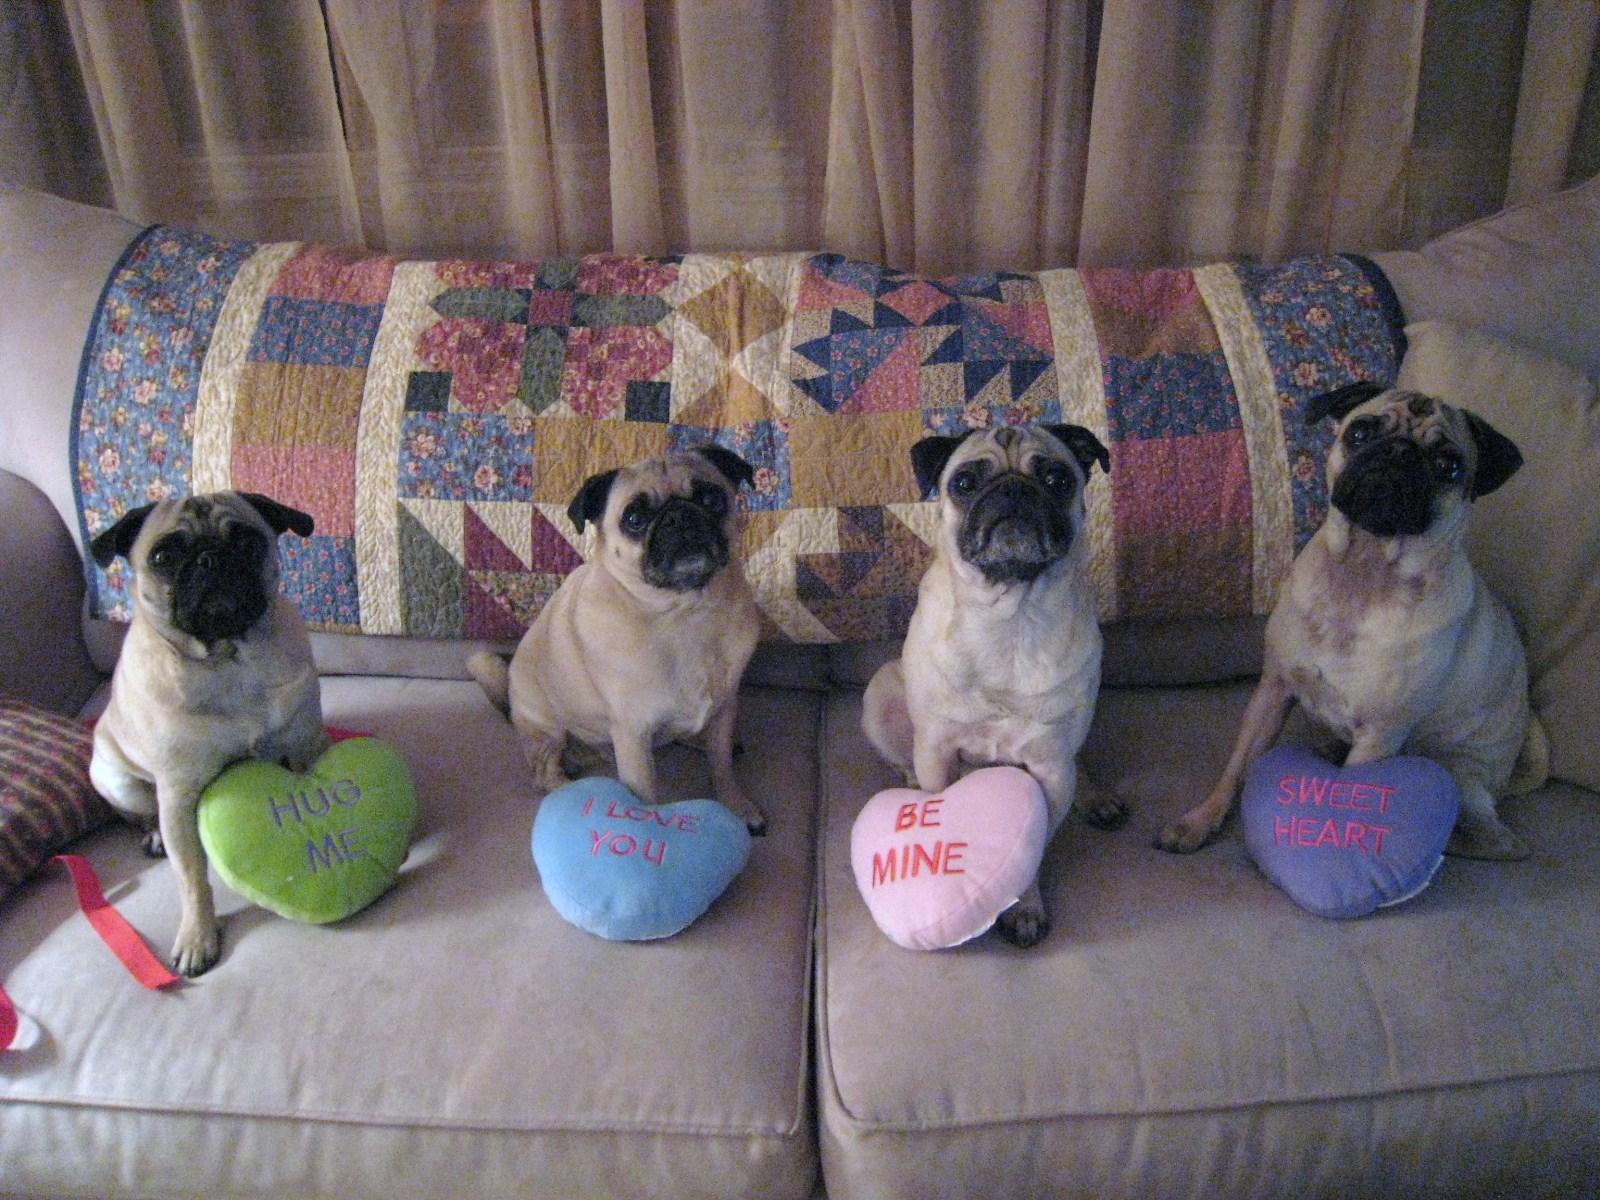 Nice Pug dogs Valentine's Day photo and wallpaper. Beautiful